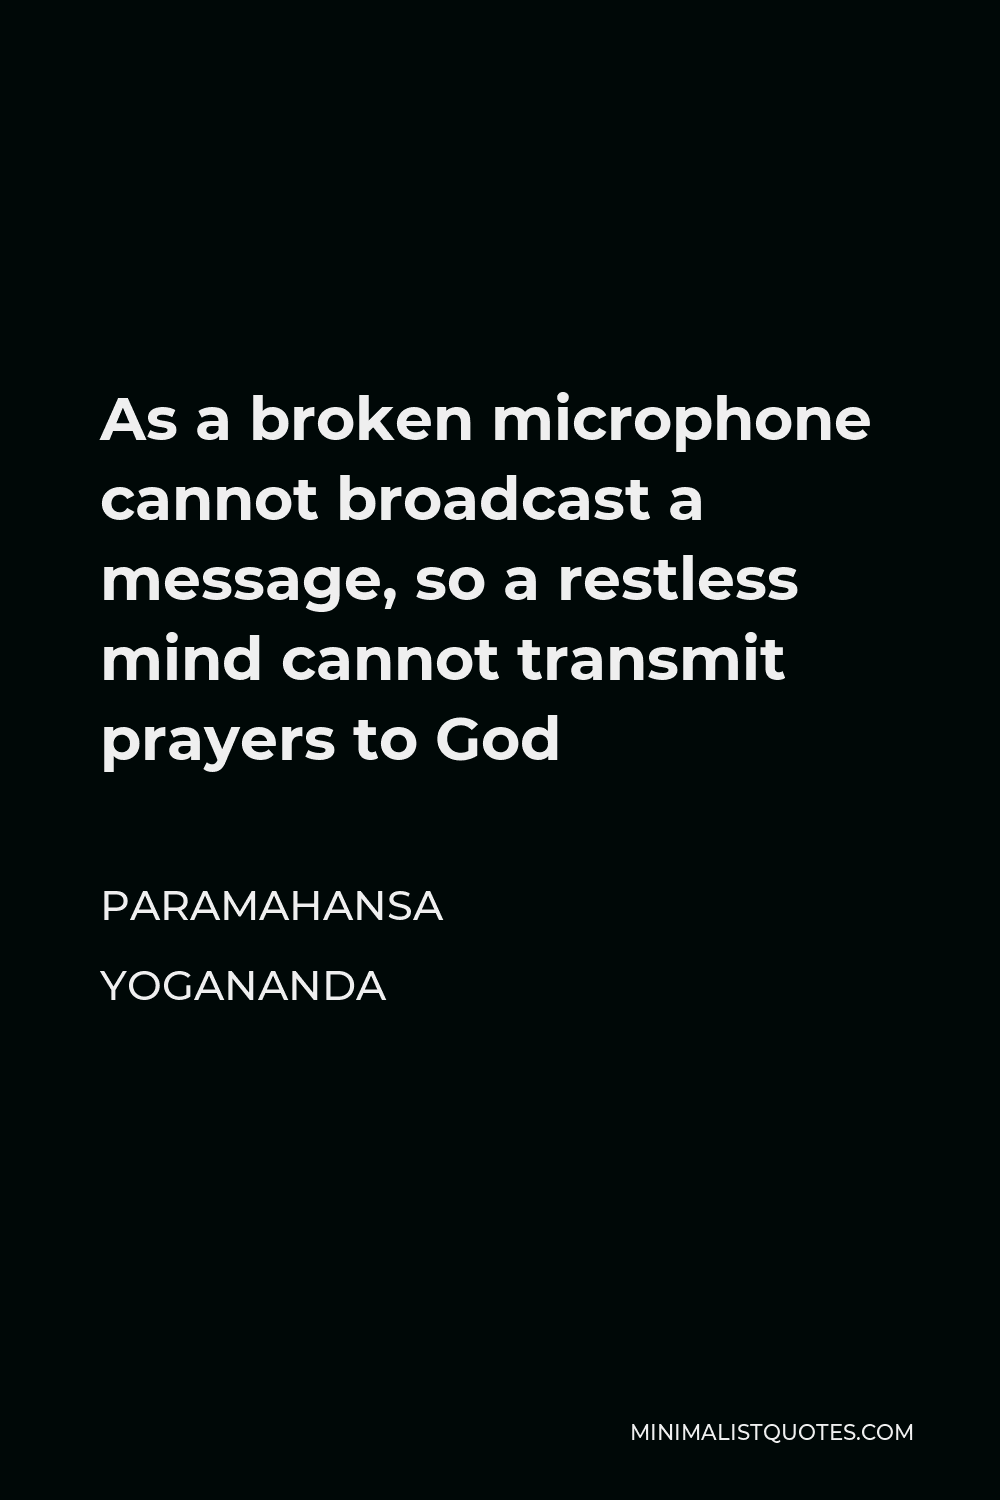 Paramahansa Yogananda Quote - As a broken microphone cannot broadcast a message, so a restless mind cannot transmit prayers to God